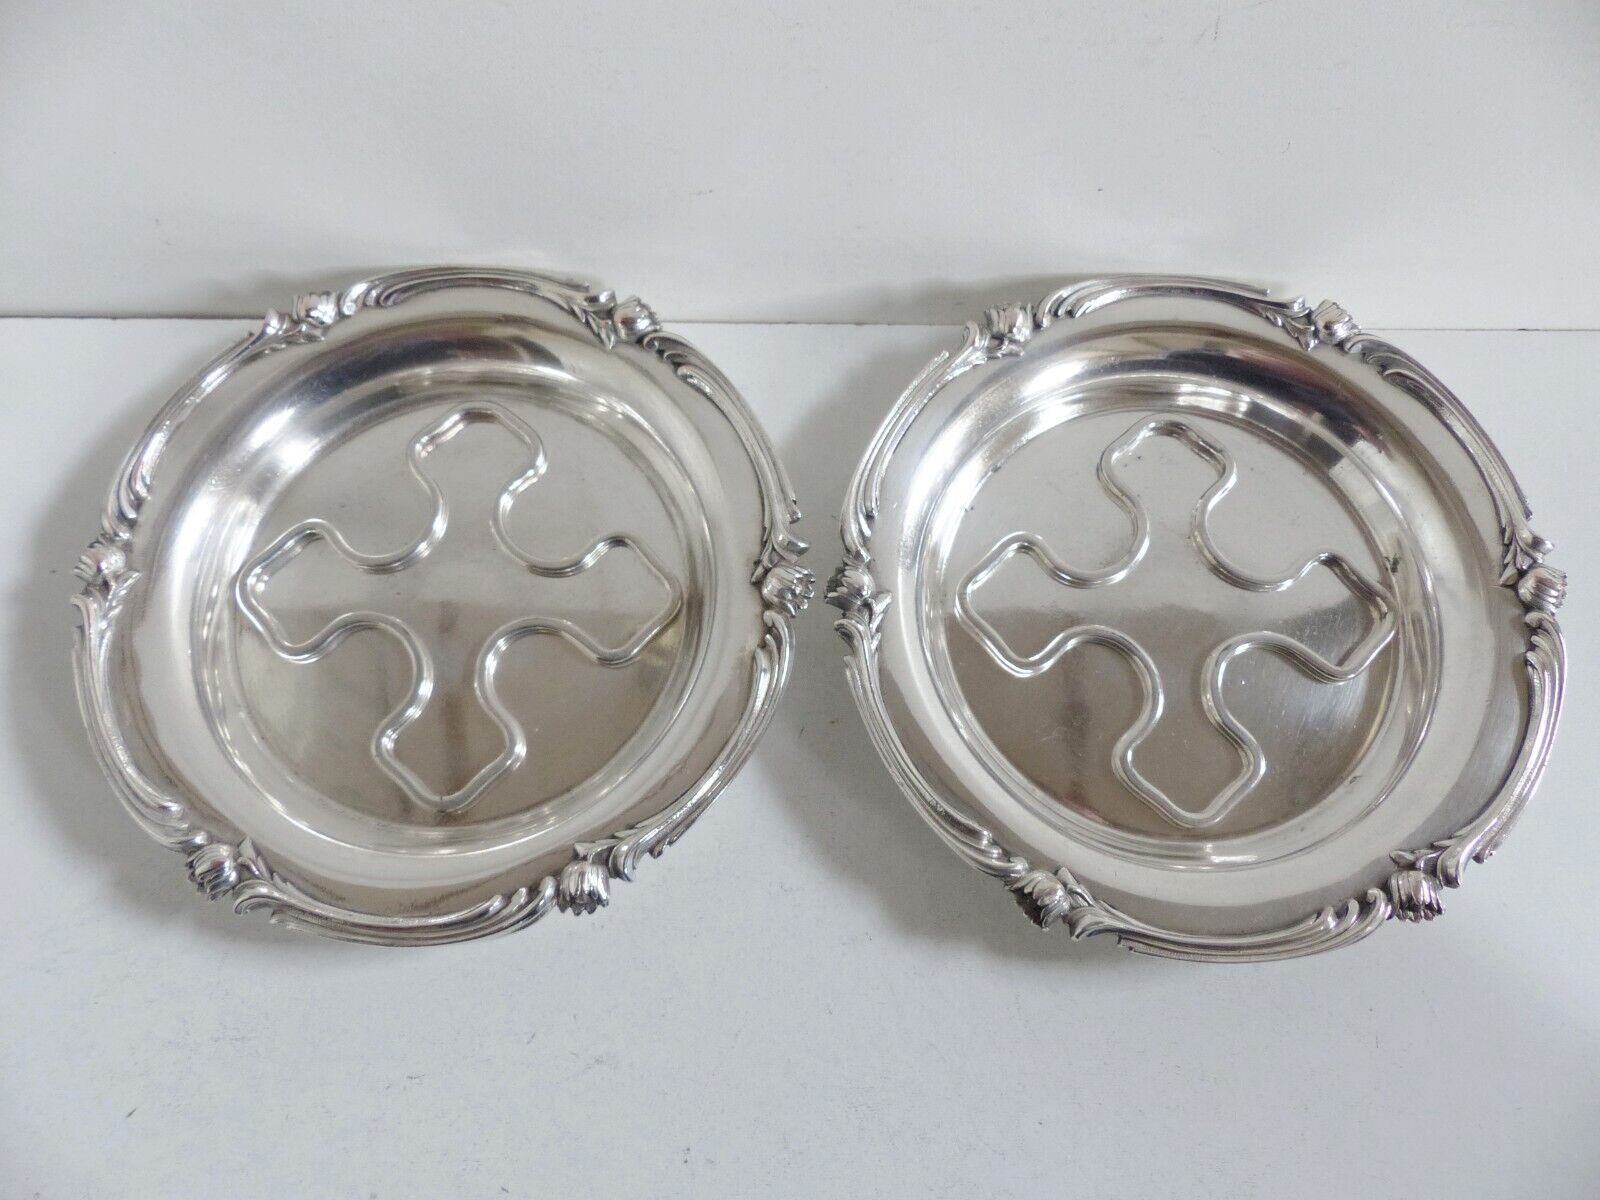 Rare Pair Of Antiques Christofle Marly Silver Plated Wine Bottle Coasters 1890's